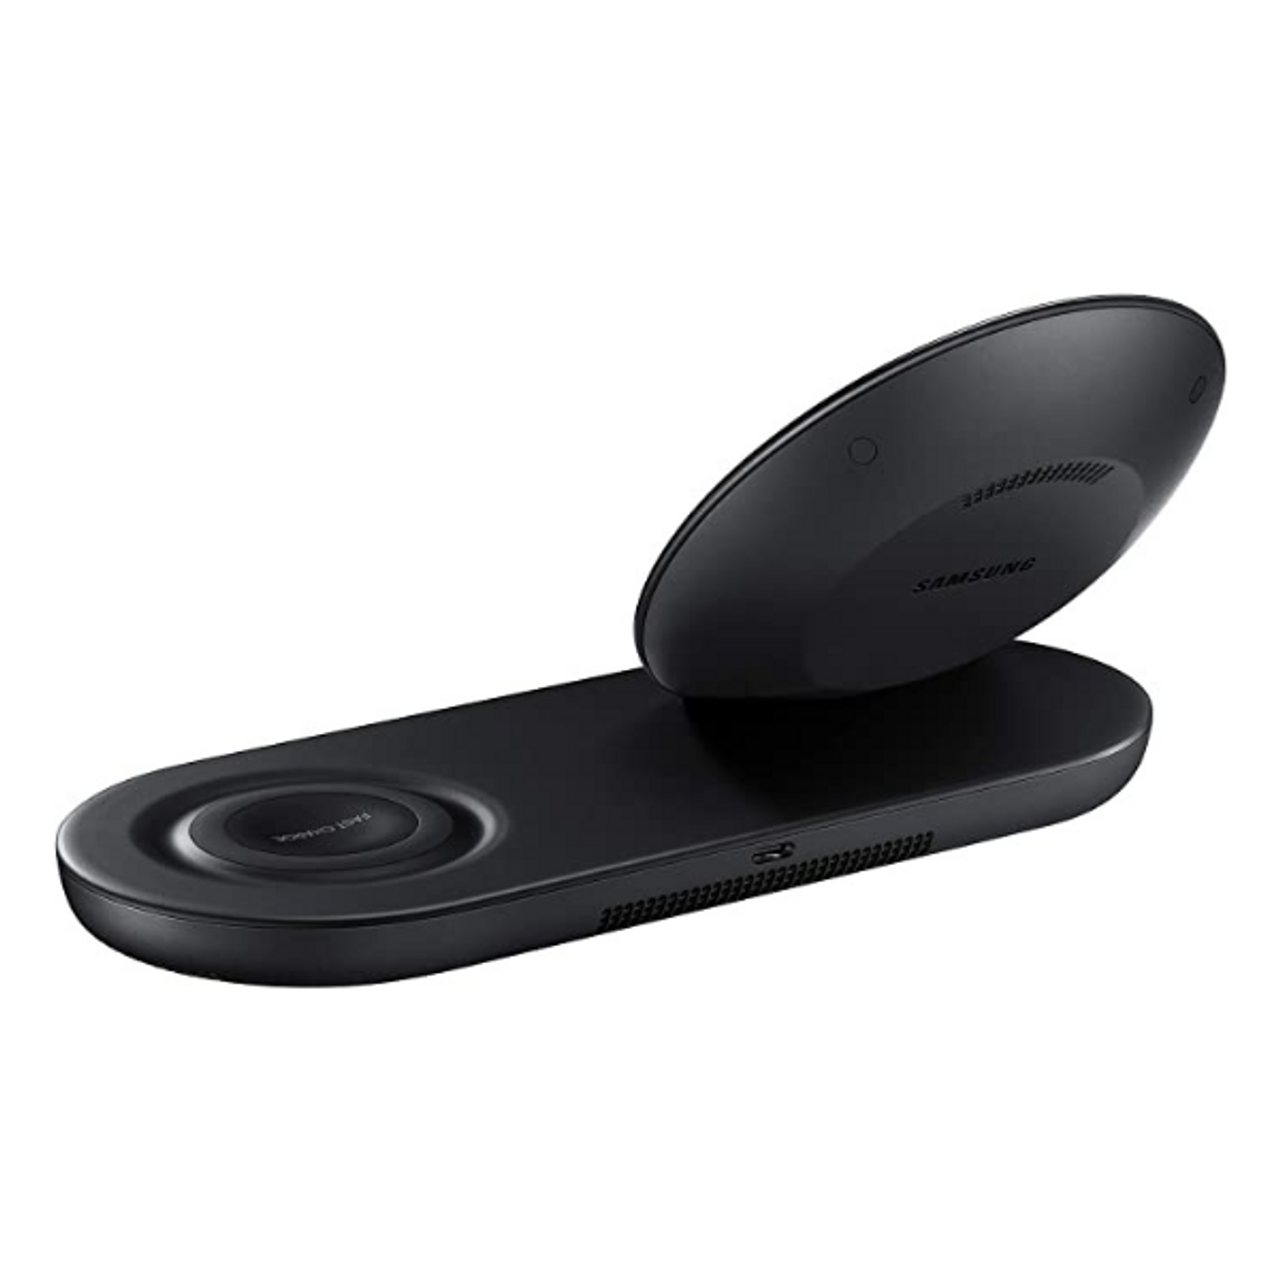 Samsung® Duo Fast Wireless Charging Dock (EP-N6100) – Black product image